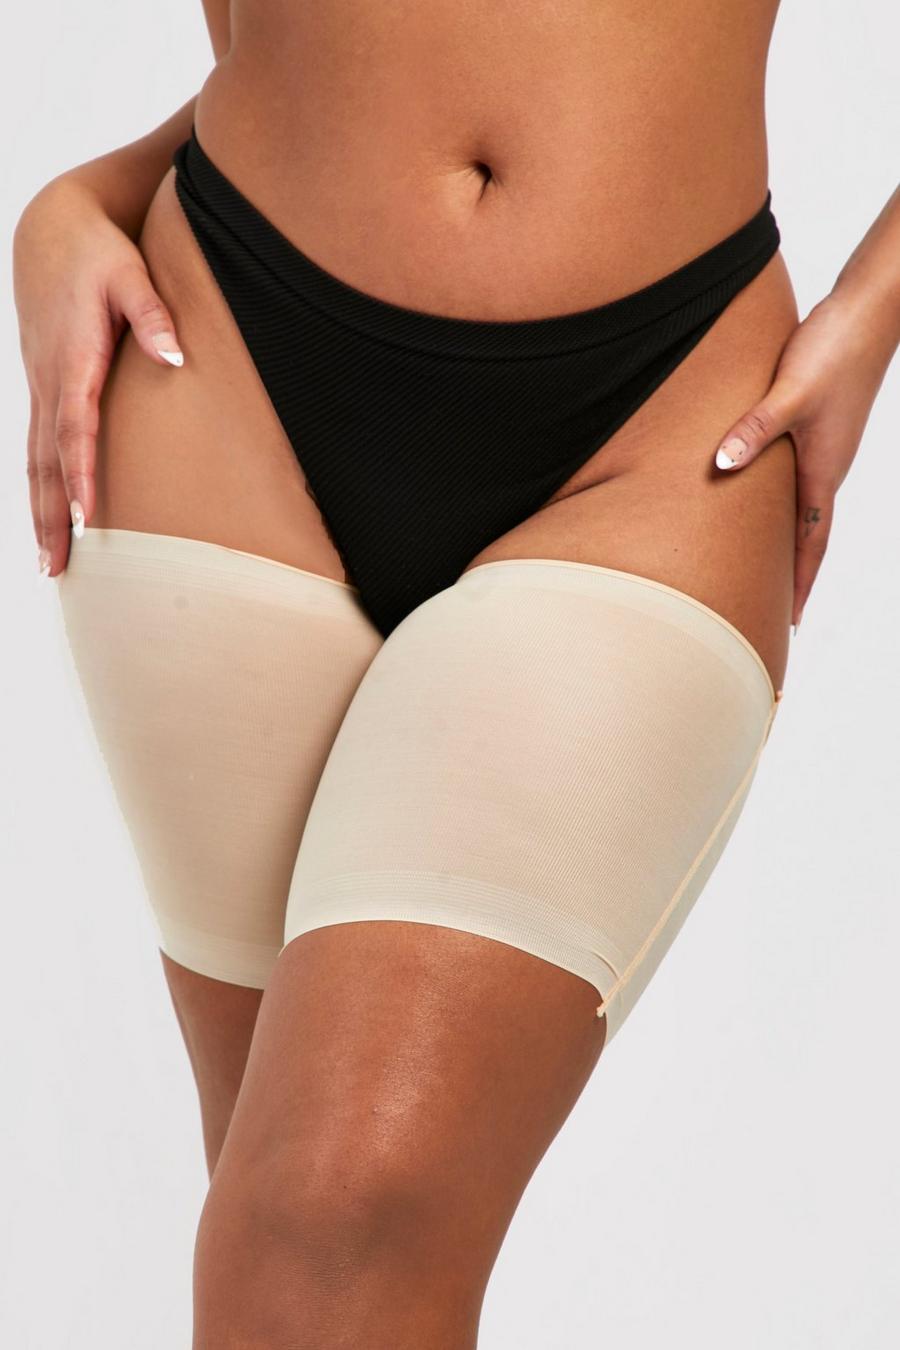 Lace anti-chafing bands